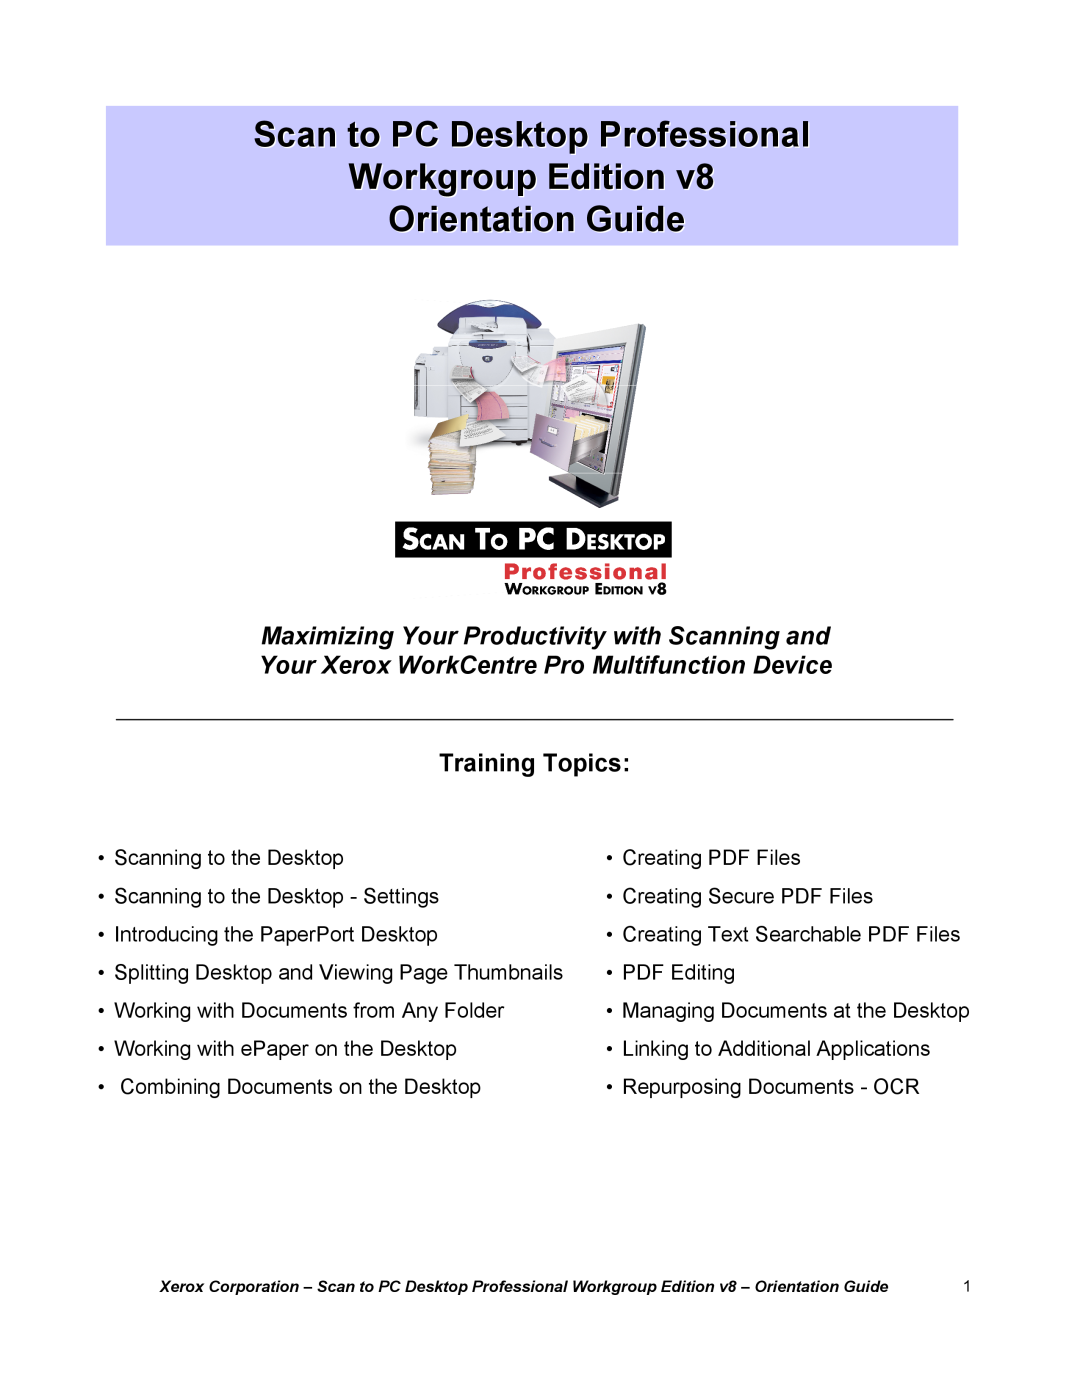 Xerox G8144Z manual Scan to PC Desktop Professional Workgroup Edition Orientation Guide, Training Topics 